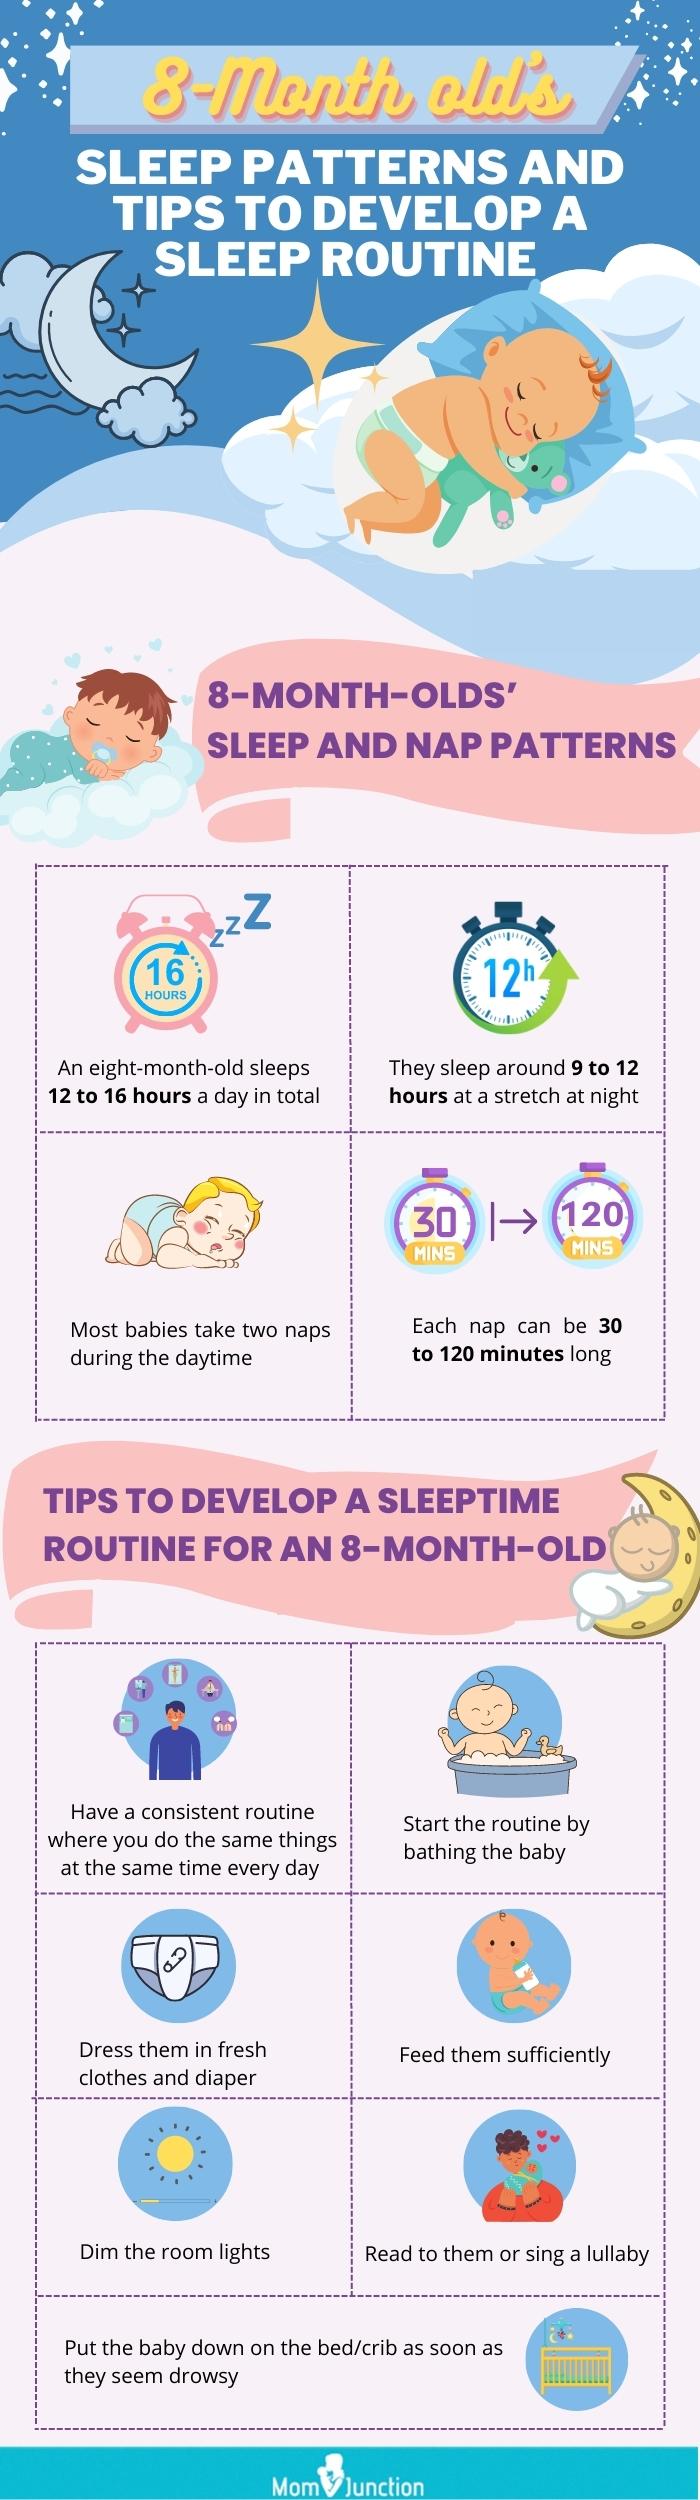 https://www.momjunction.com/wp-content/uploads/2020/12/8-Month-Olds-Sleep-Patterns-And-Tips-To-Develop-A-Sleep-Routine-101.jpg